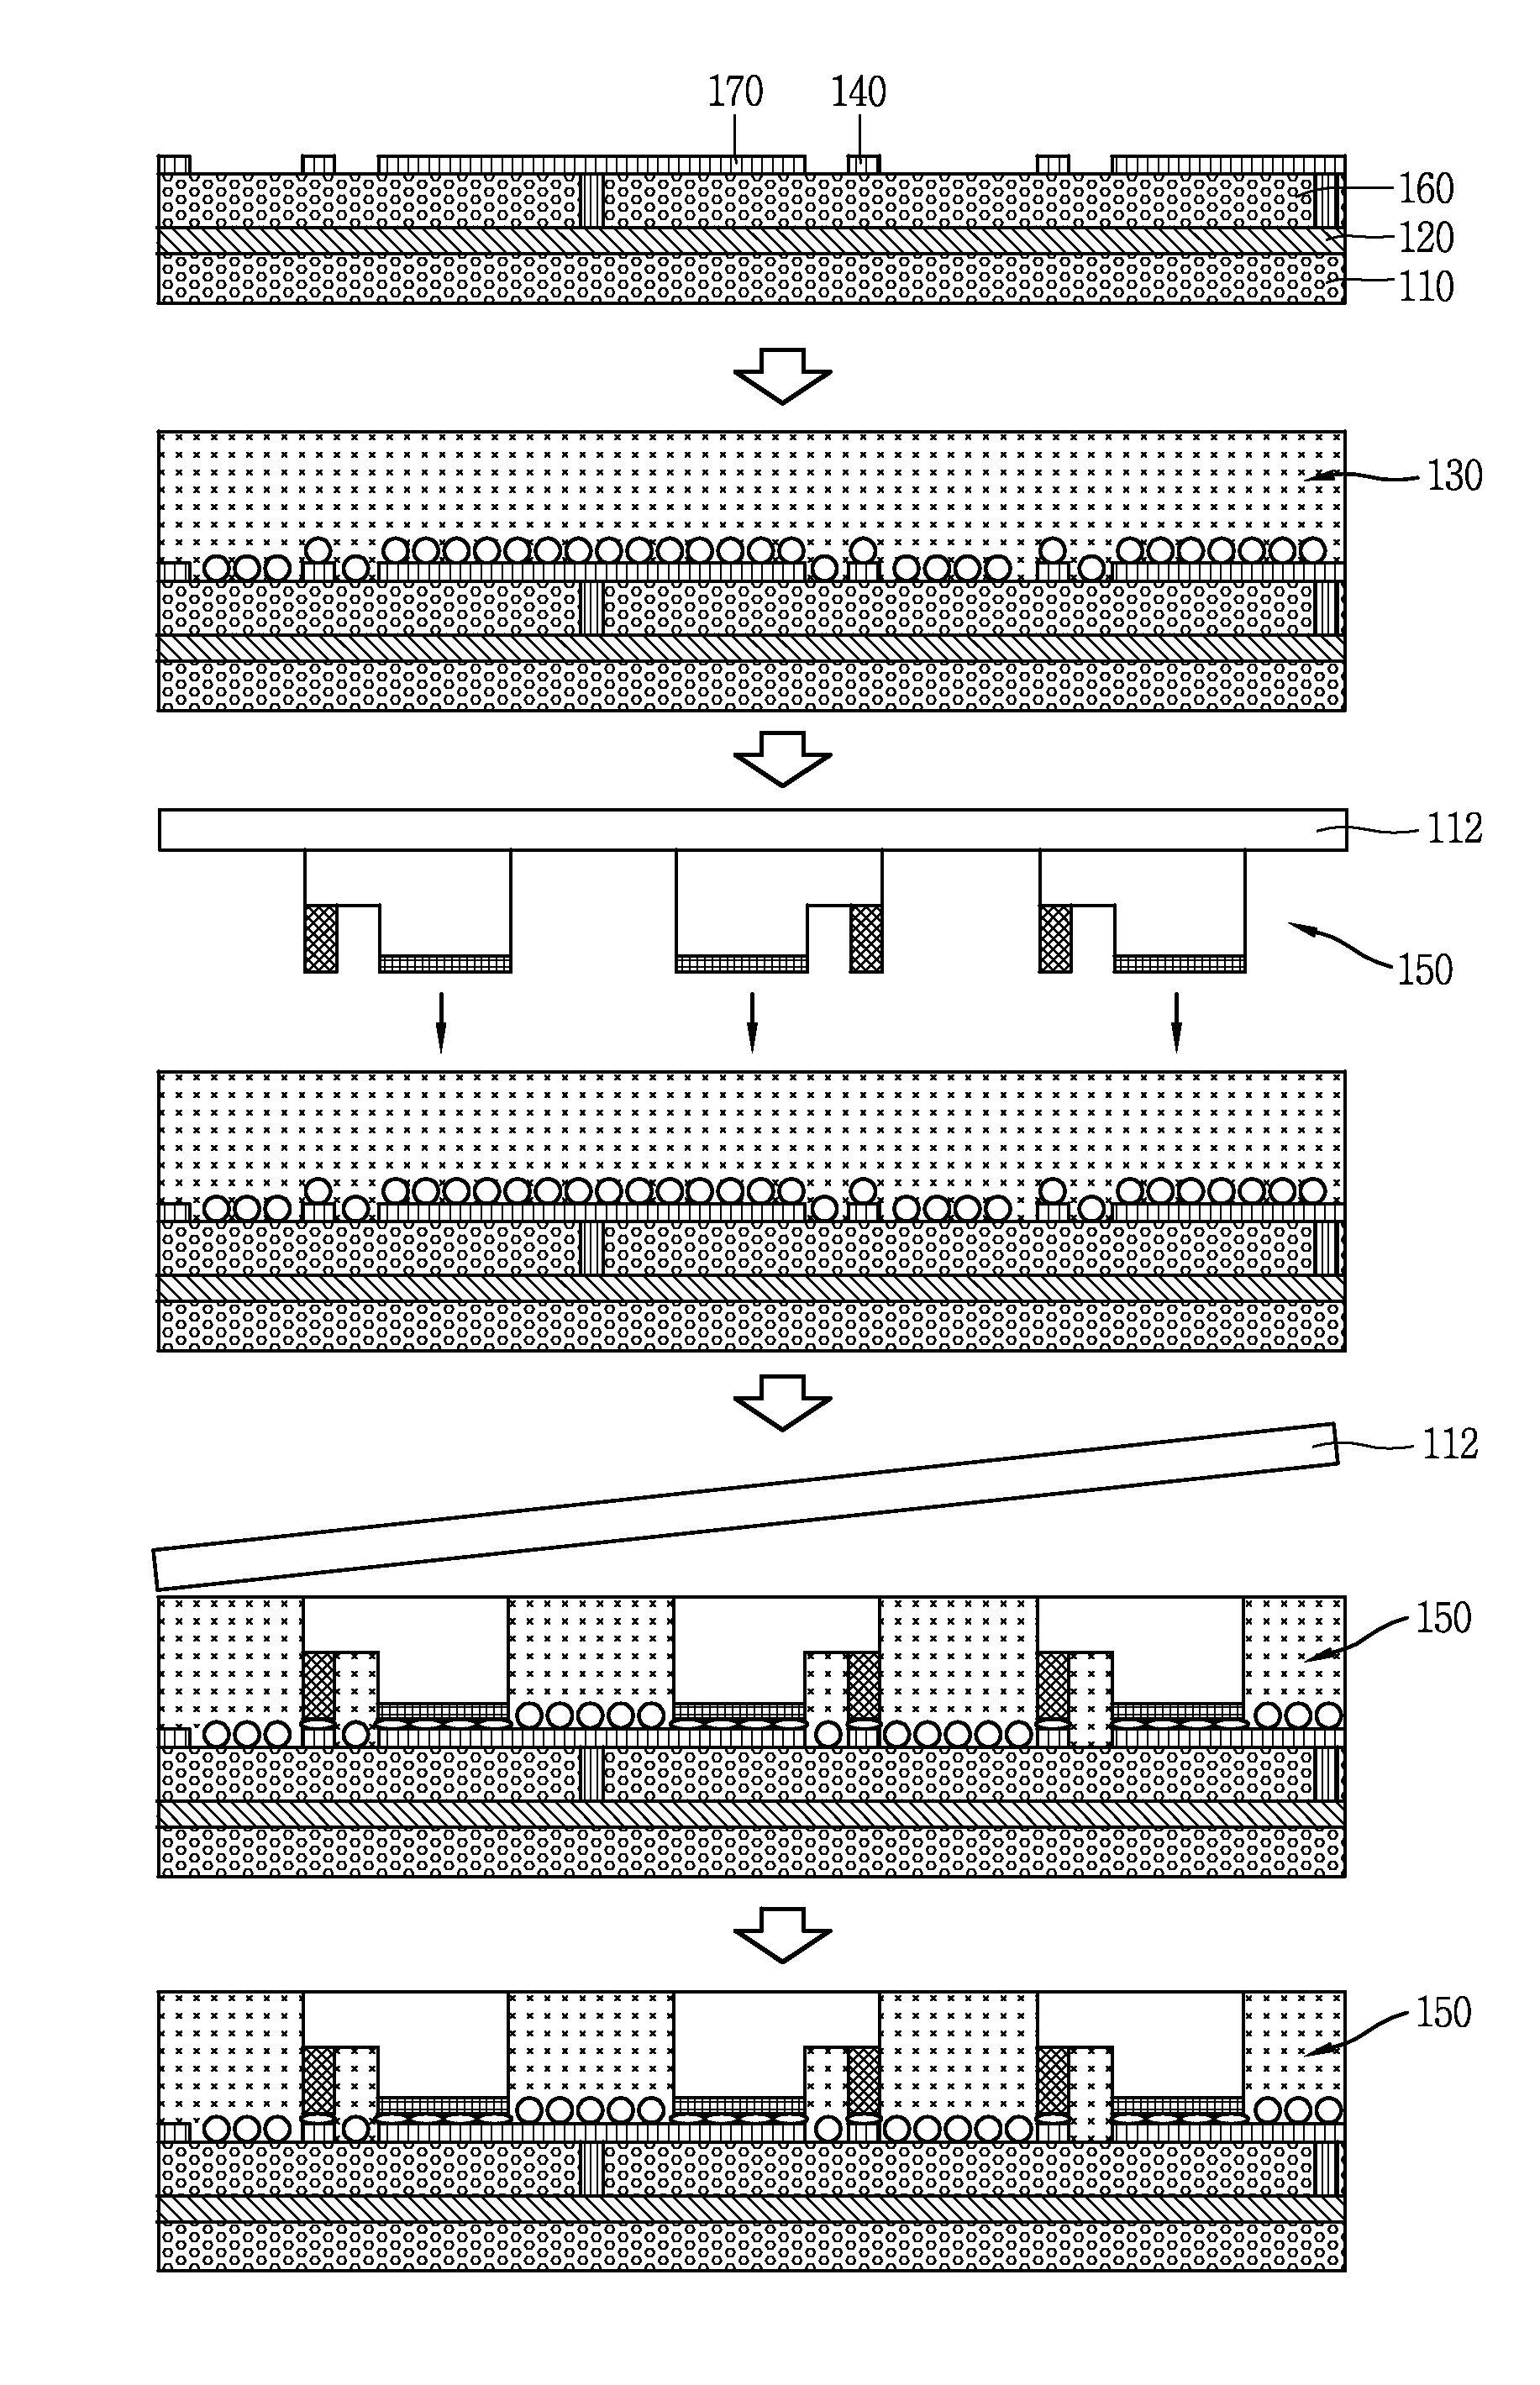 Semiconductor light emitting device, transfer head of semiconductor light emitting device, and method of transferring semiconductor light emitting device